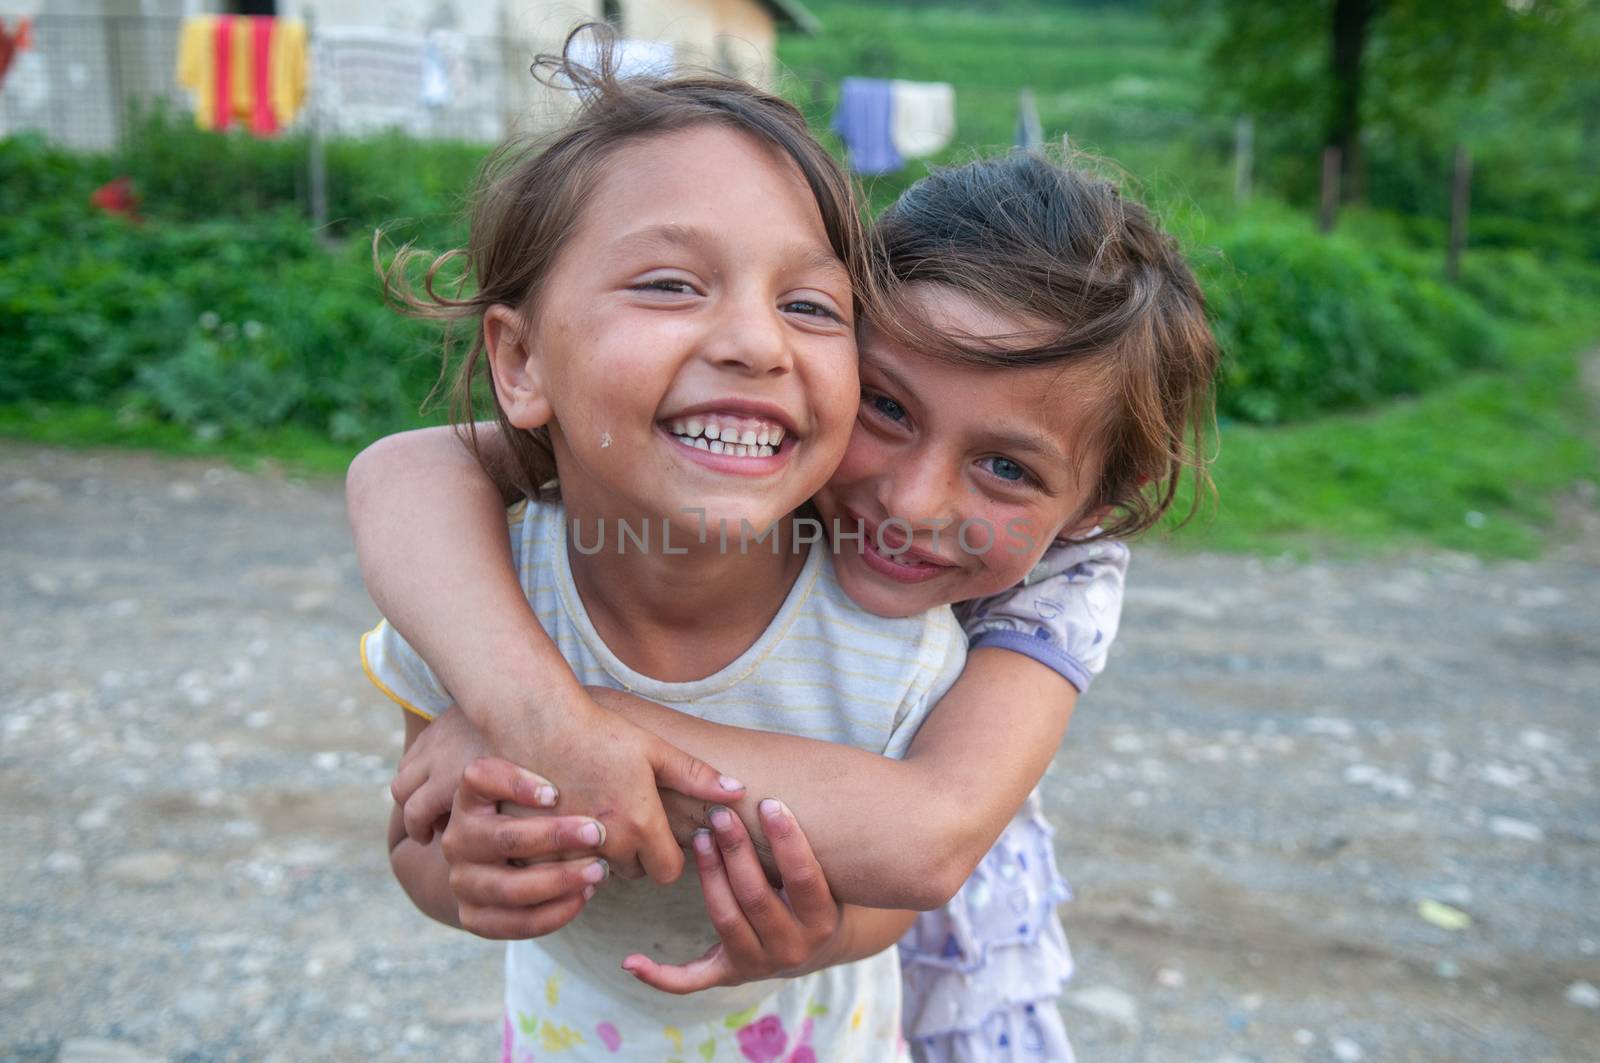 5/16/2018. Lomnicka, Slovakia. Roma community in the heart of Slovakia, living in horrible conditions. Portrait of children.